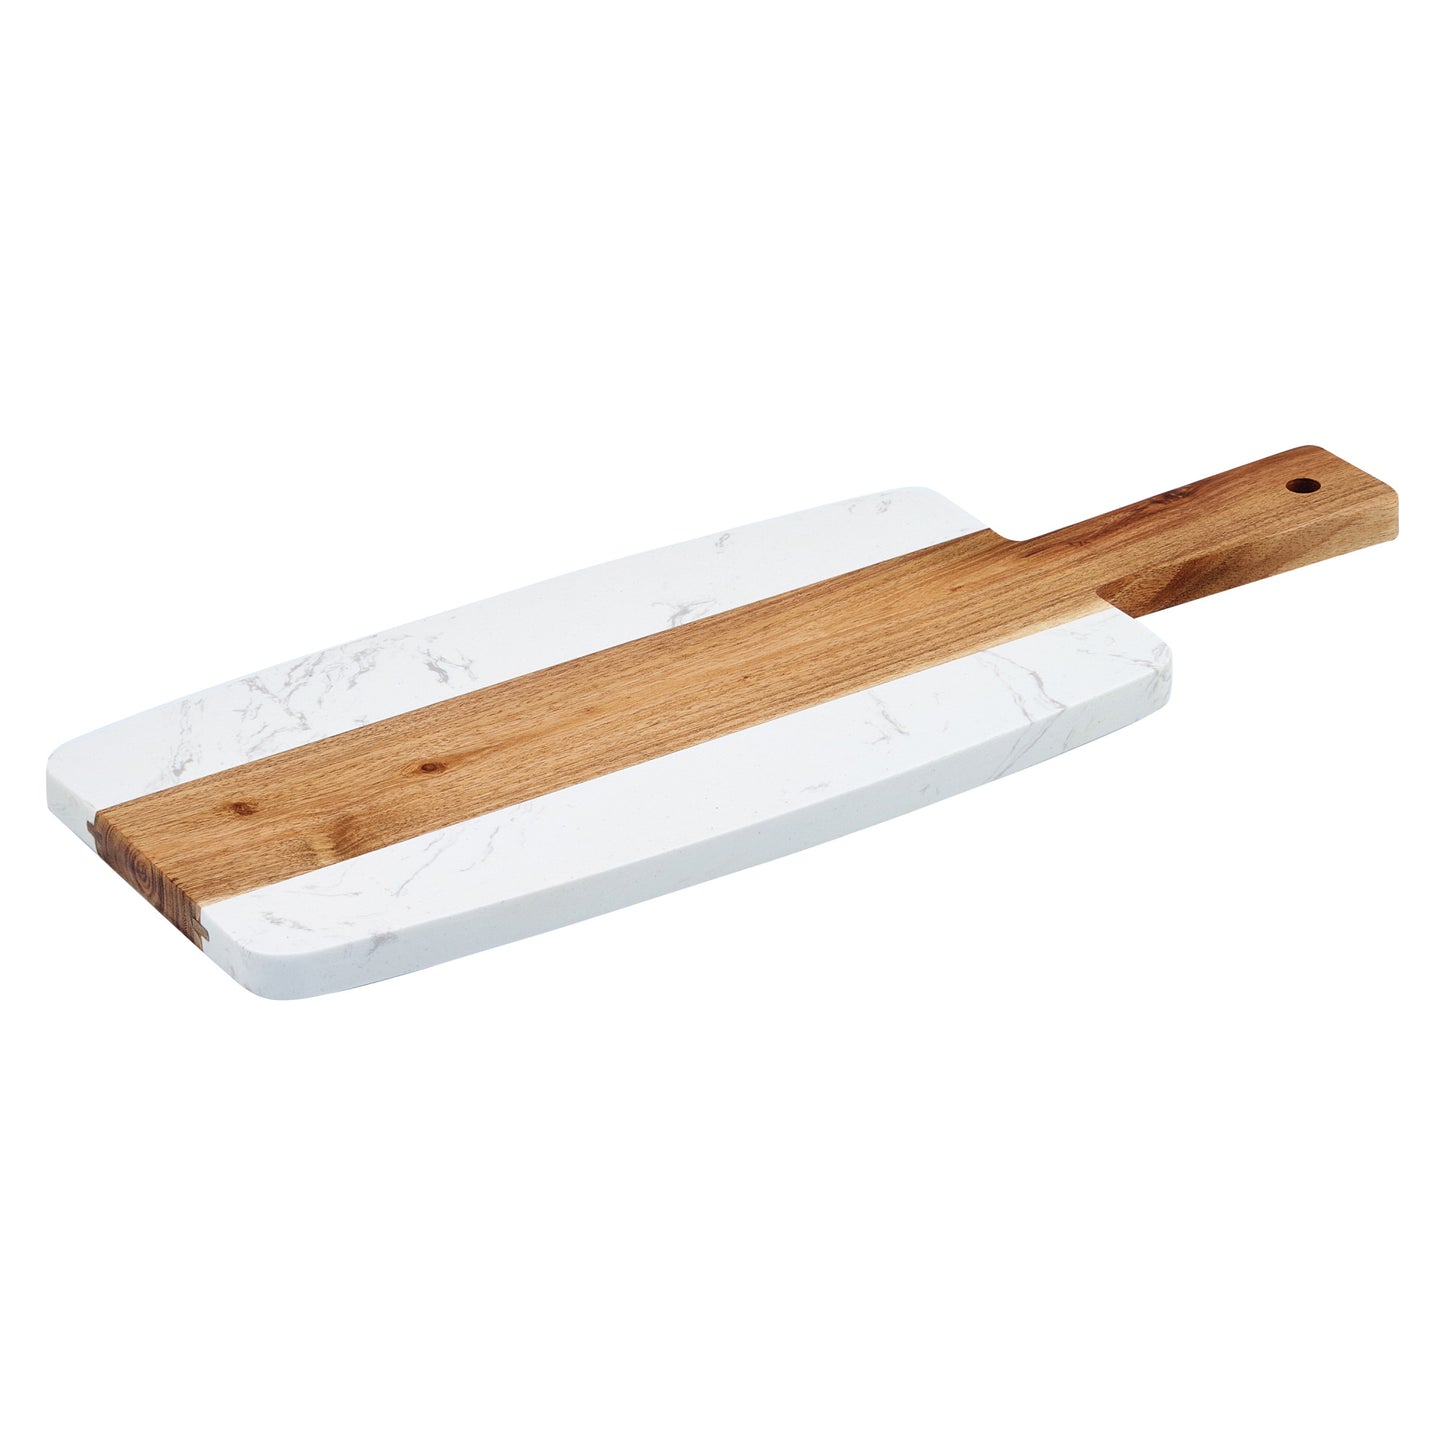 SBMW-156 - Marble and Wood Serving Board - 15-7/8"